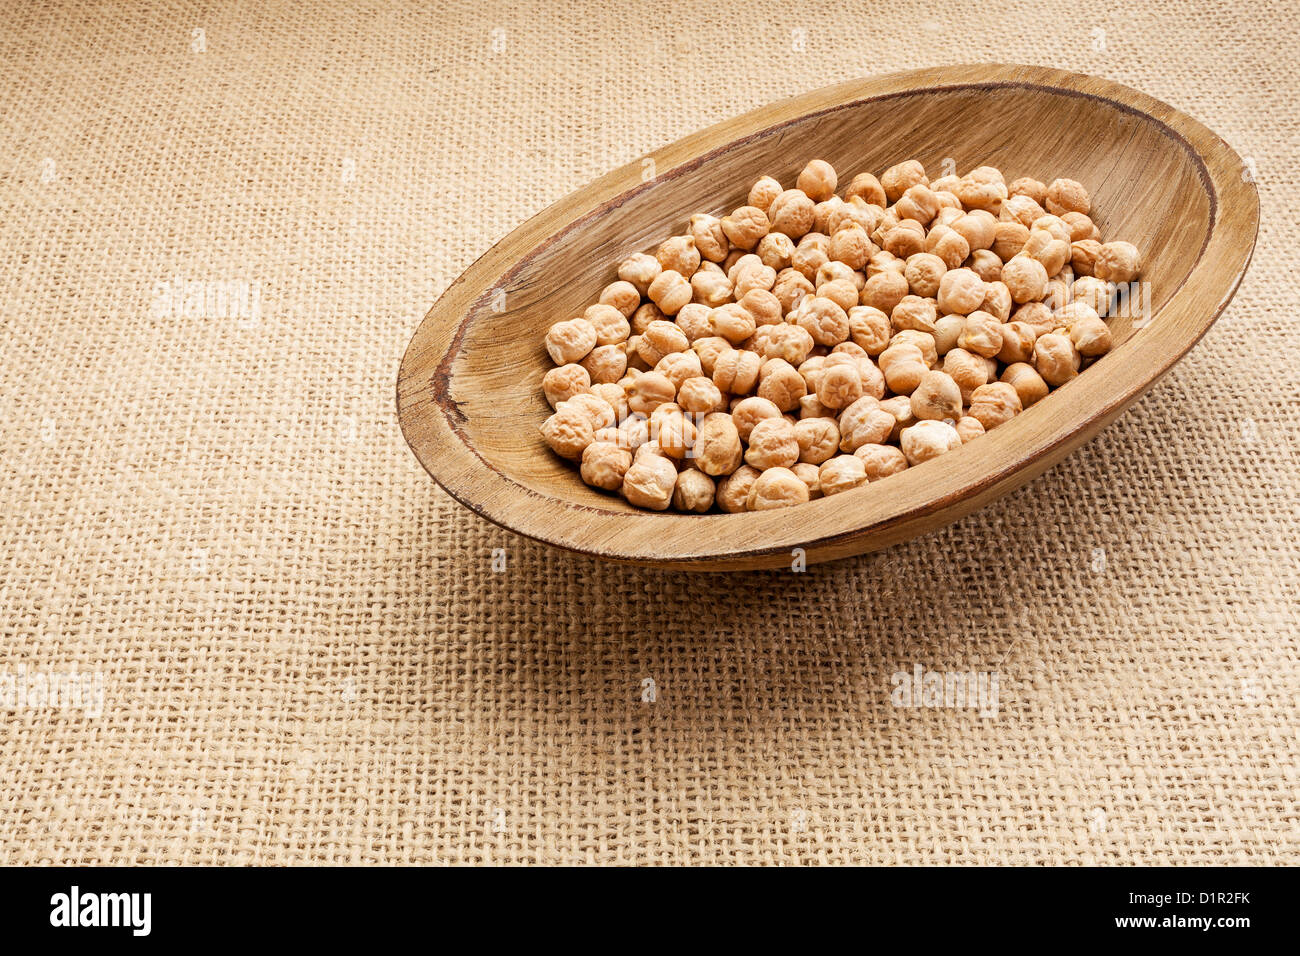 chickpea (garbanzo) beans in a rustic wood bowl against burlap canvas Stock Photo